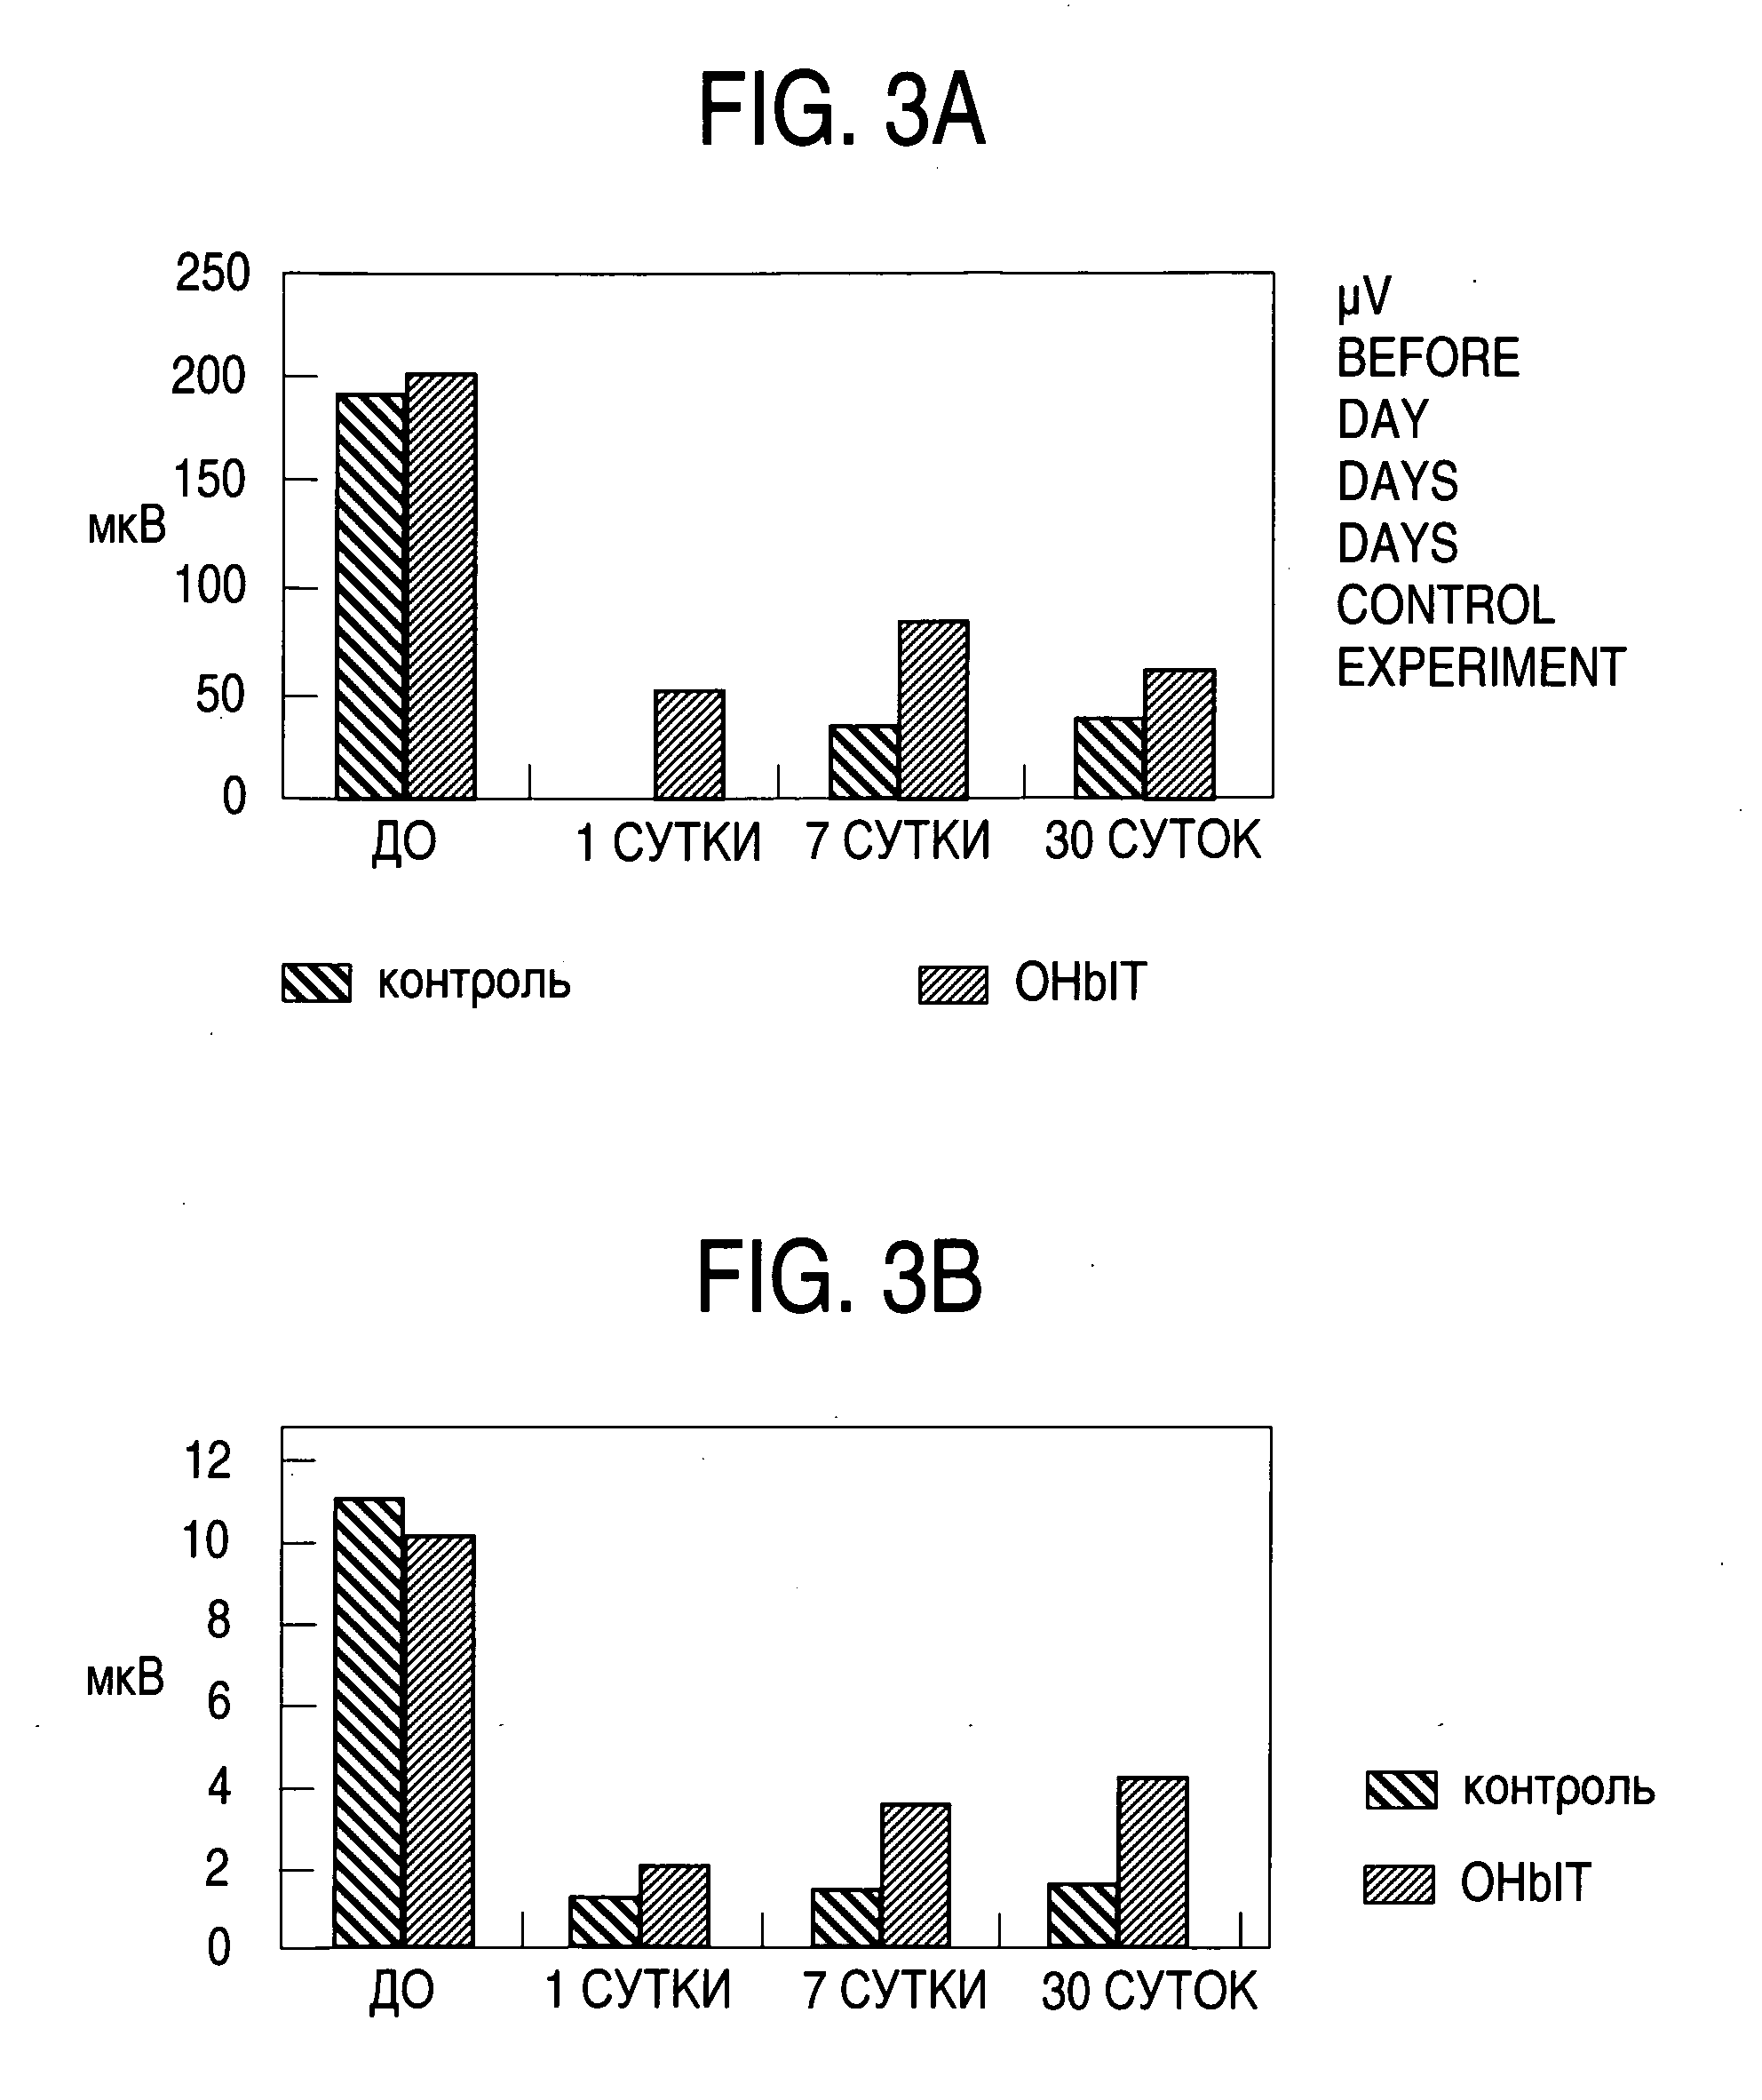 Methods for reducing the side effects of ophthalmic laser surgery